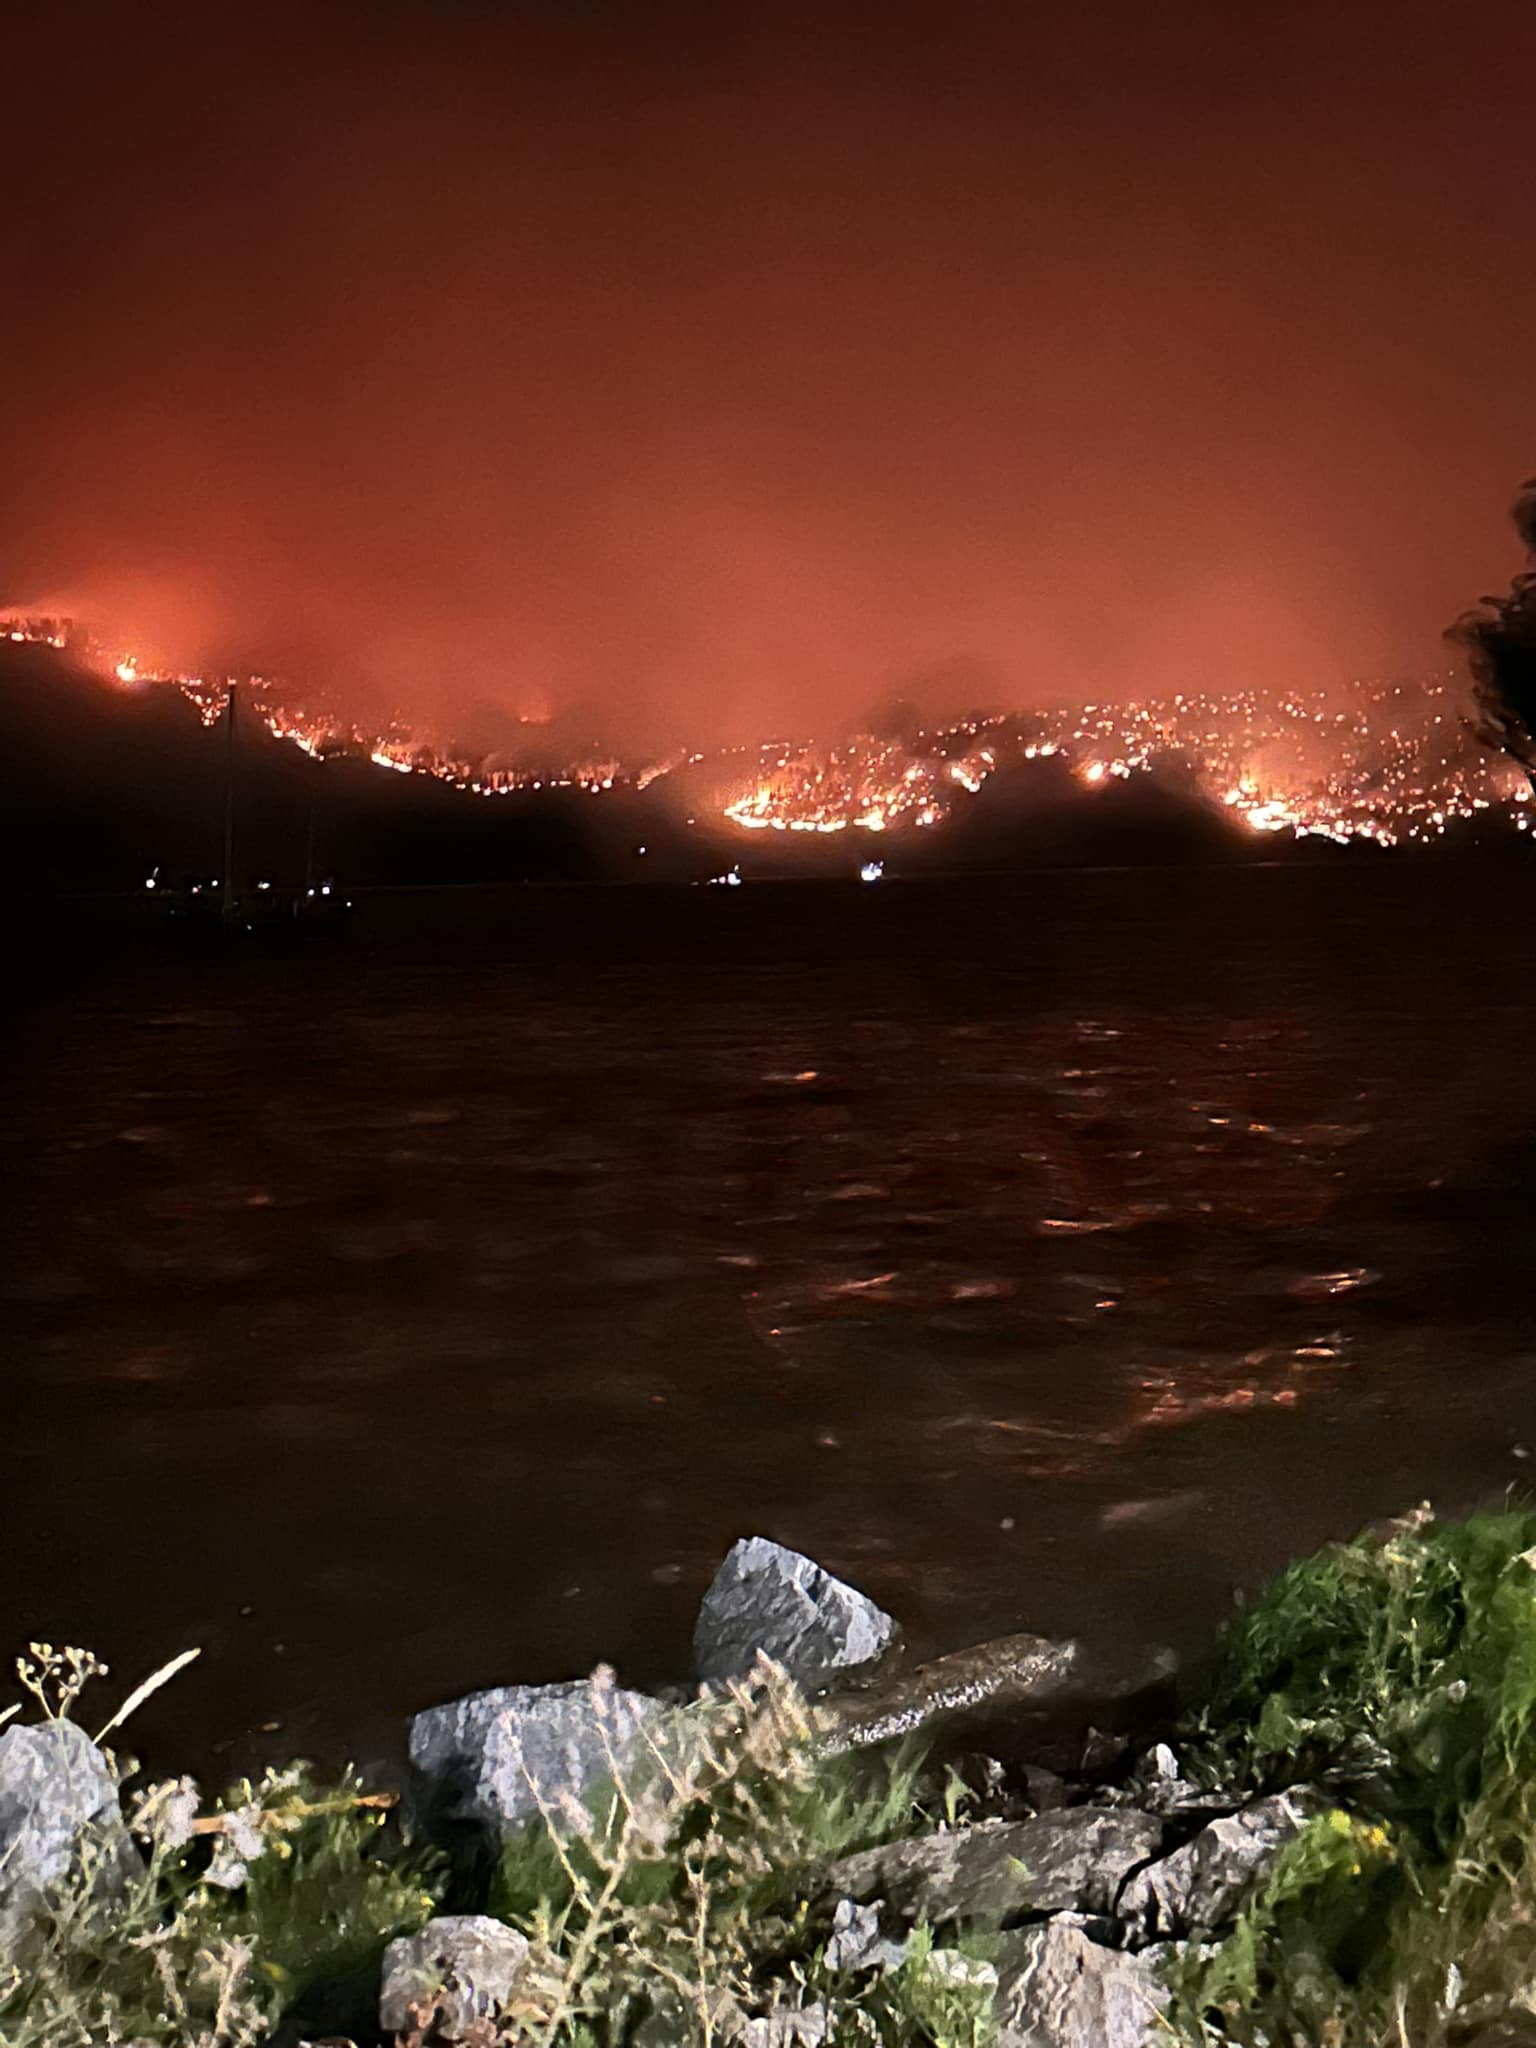 Plea for Boats to Rescue Individuals in Water Amid Fires in Canada